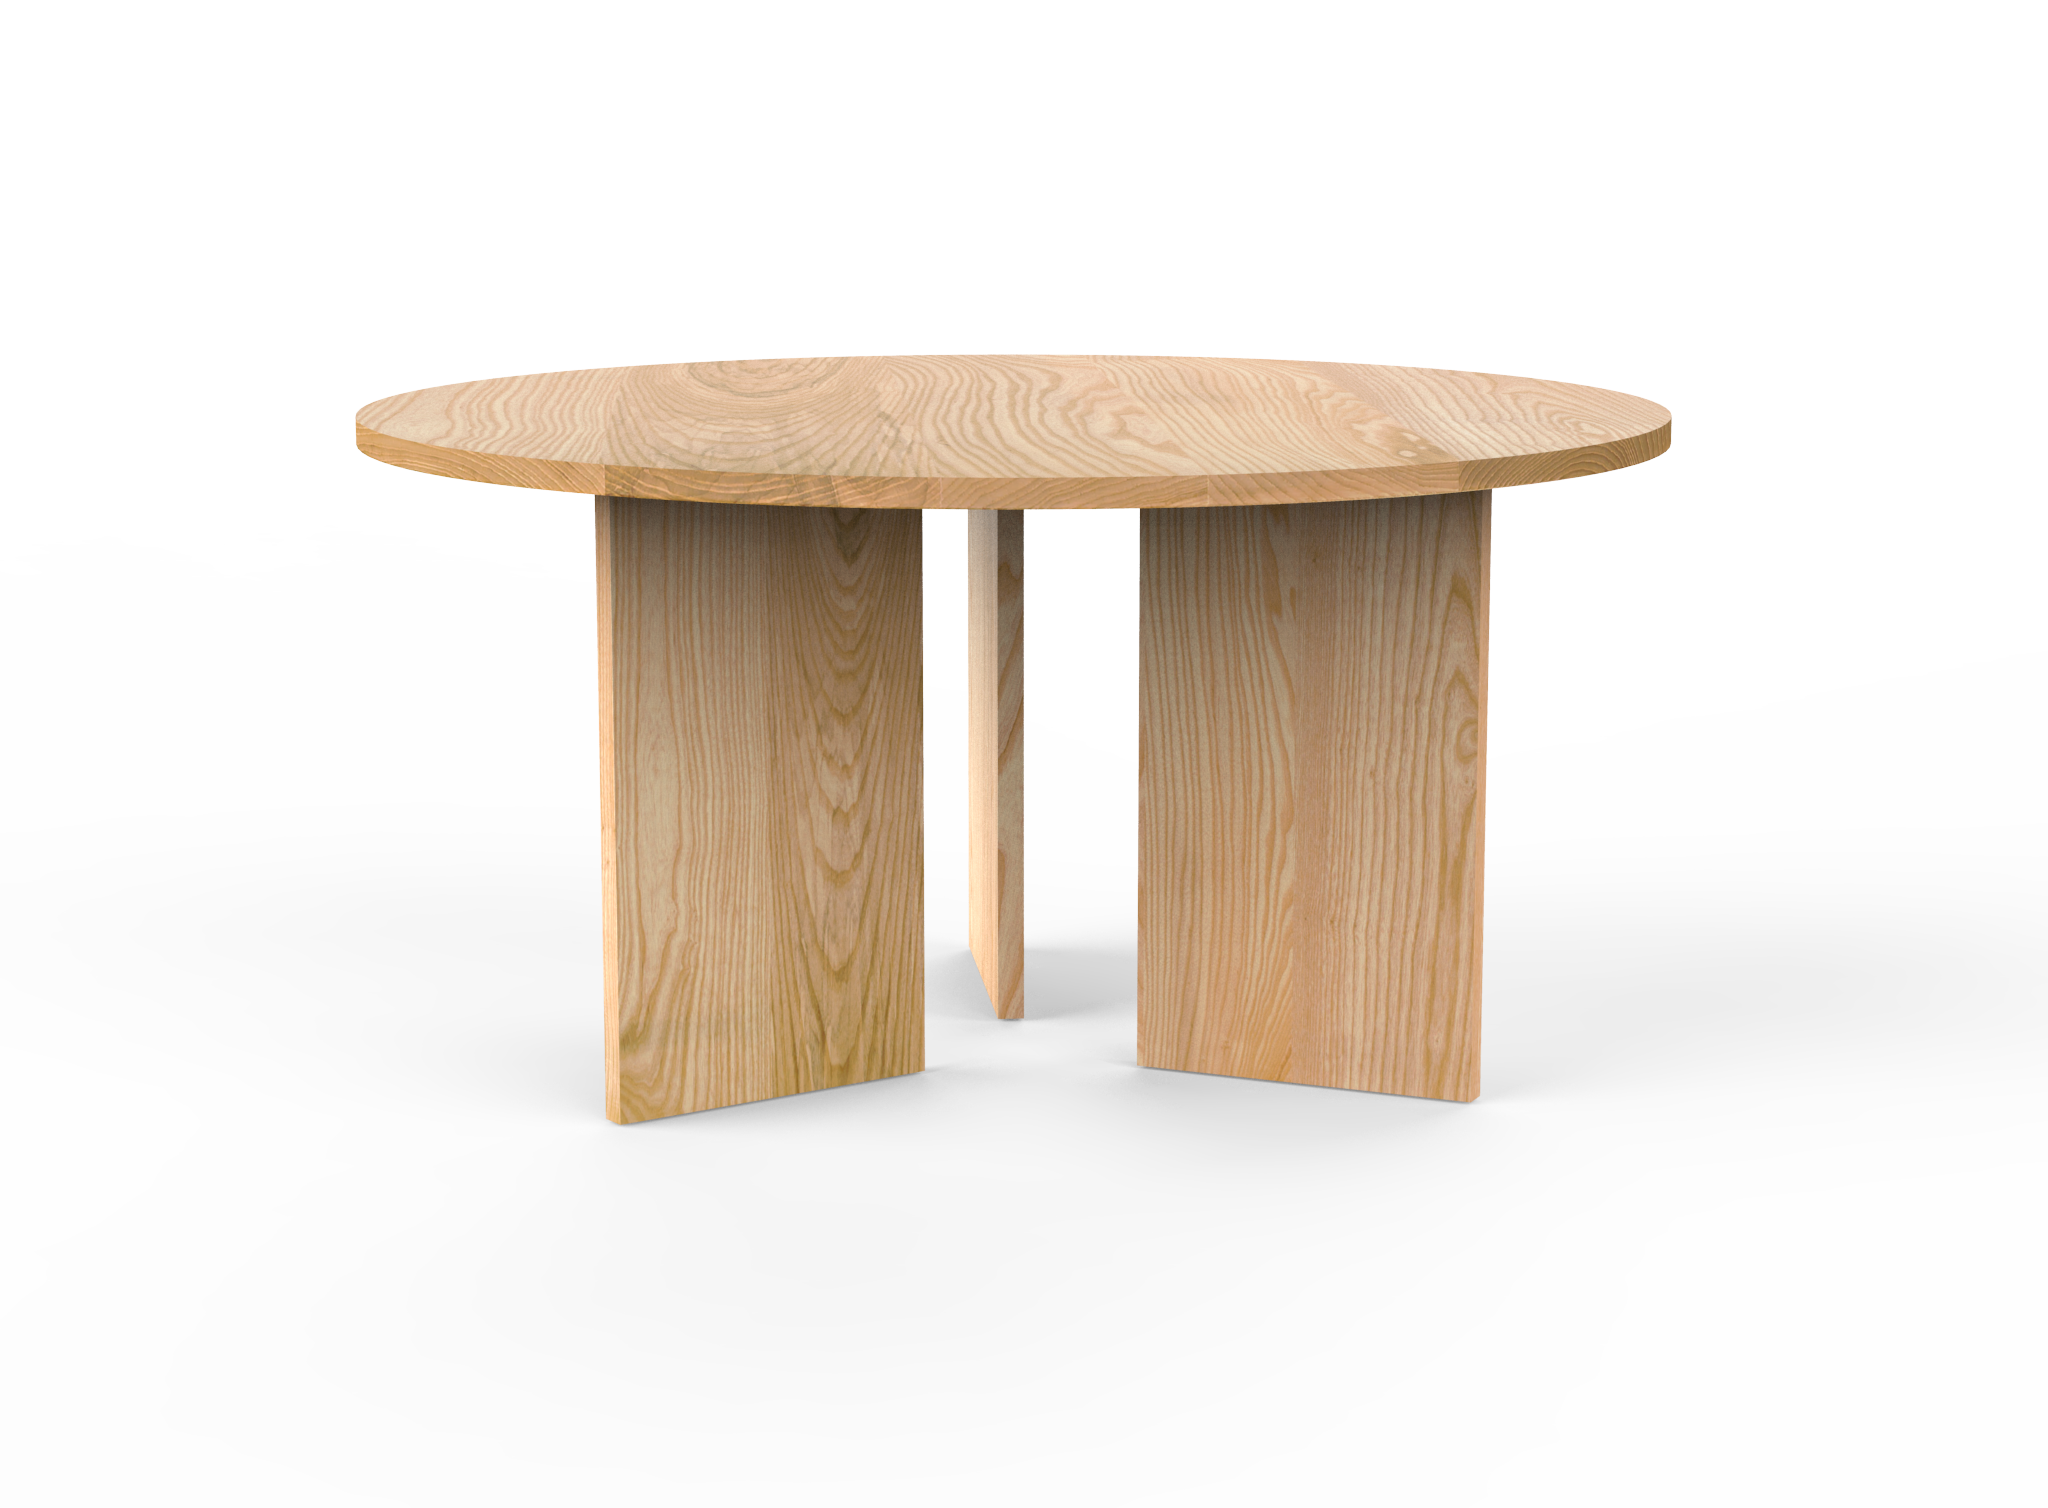 Vermont Farm Table Custom Round Wood Table Together Ash 60 